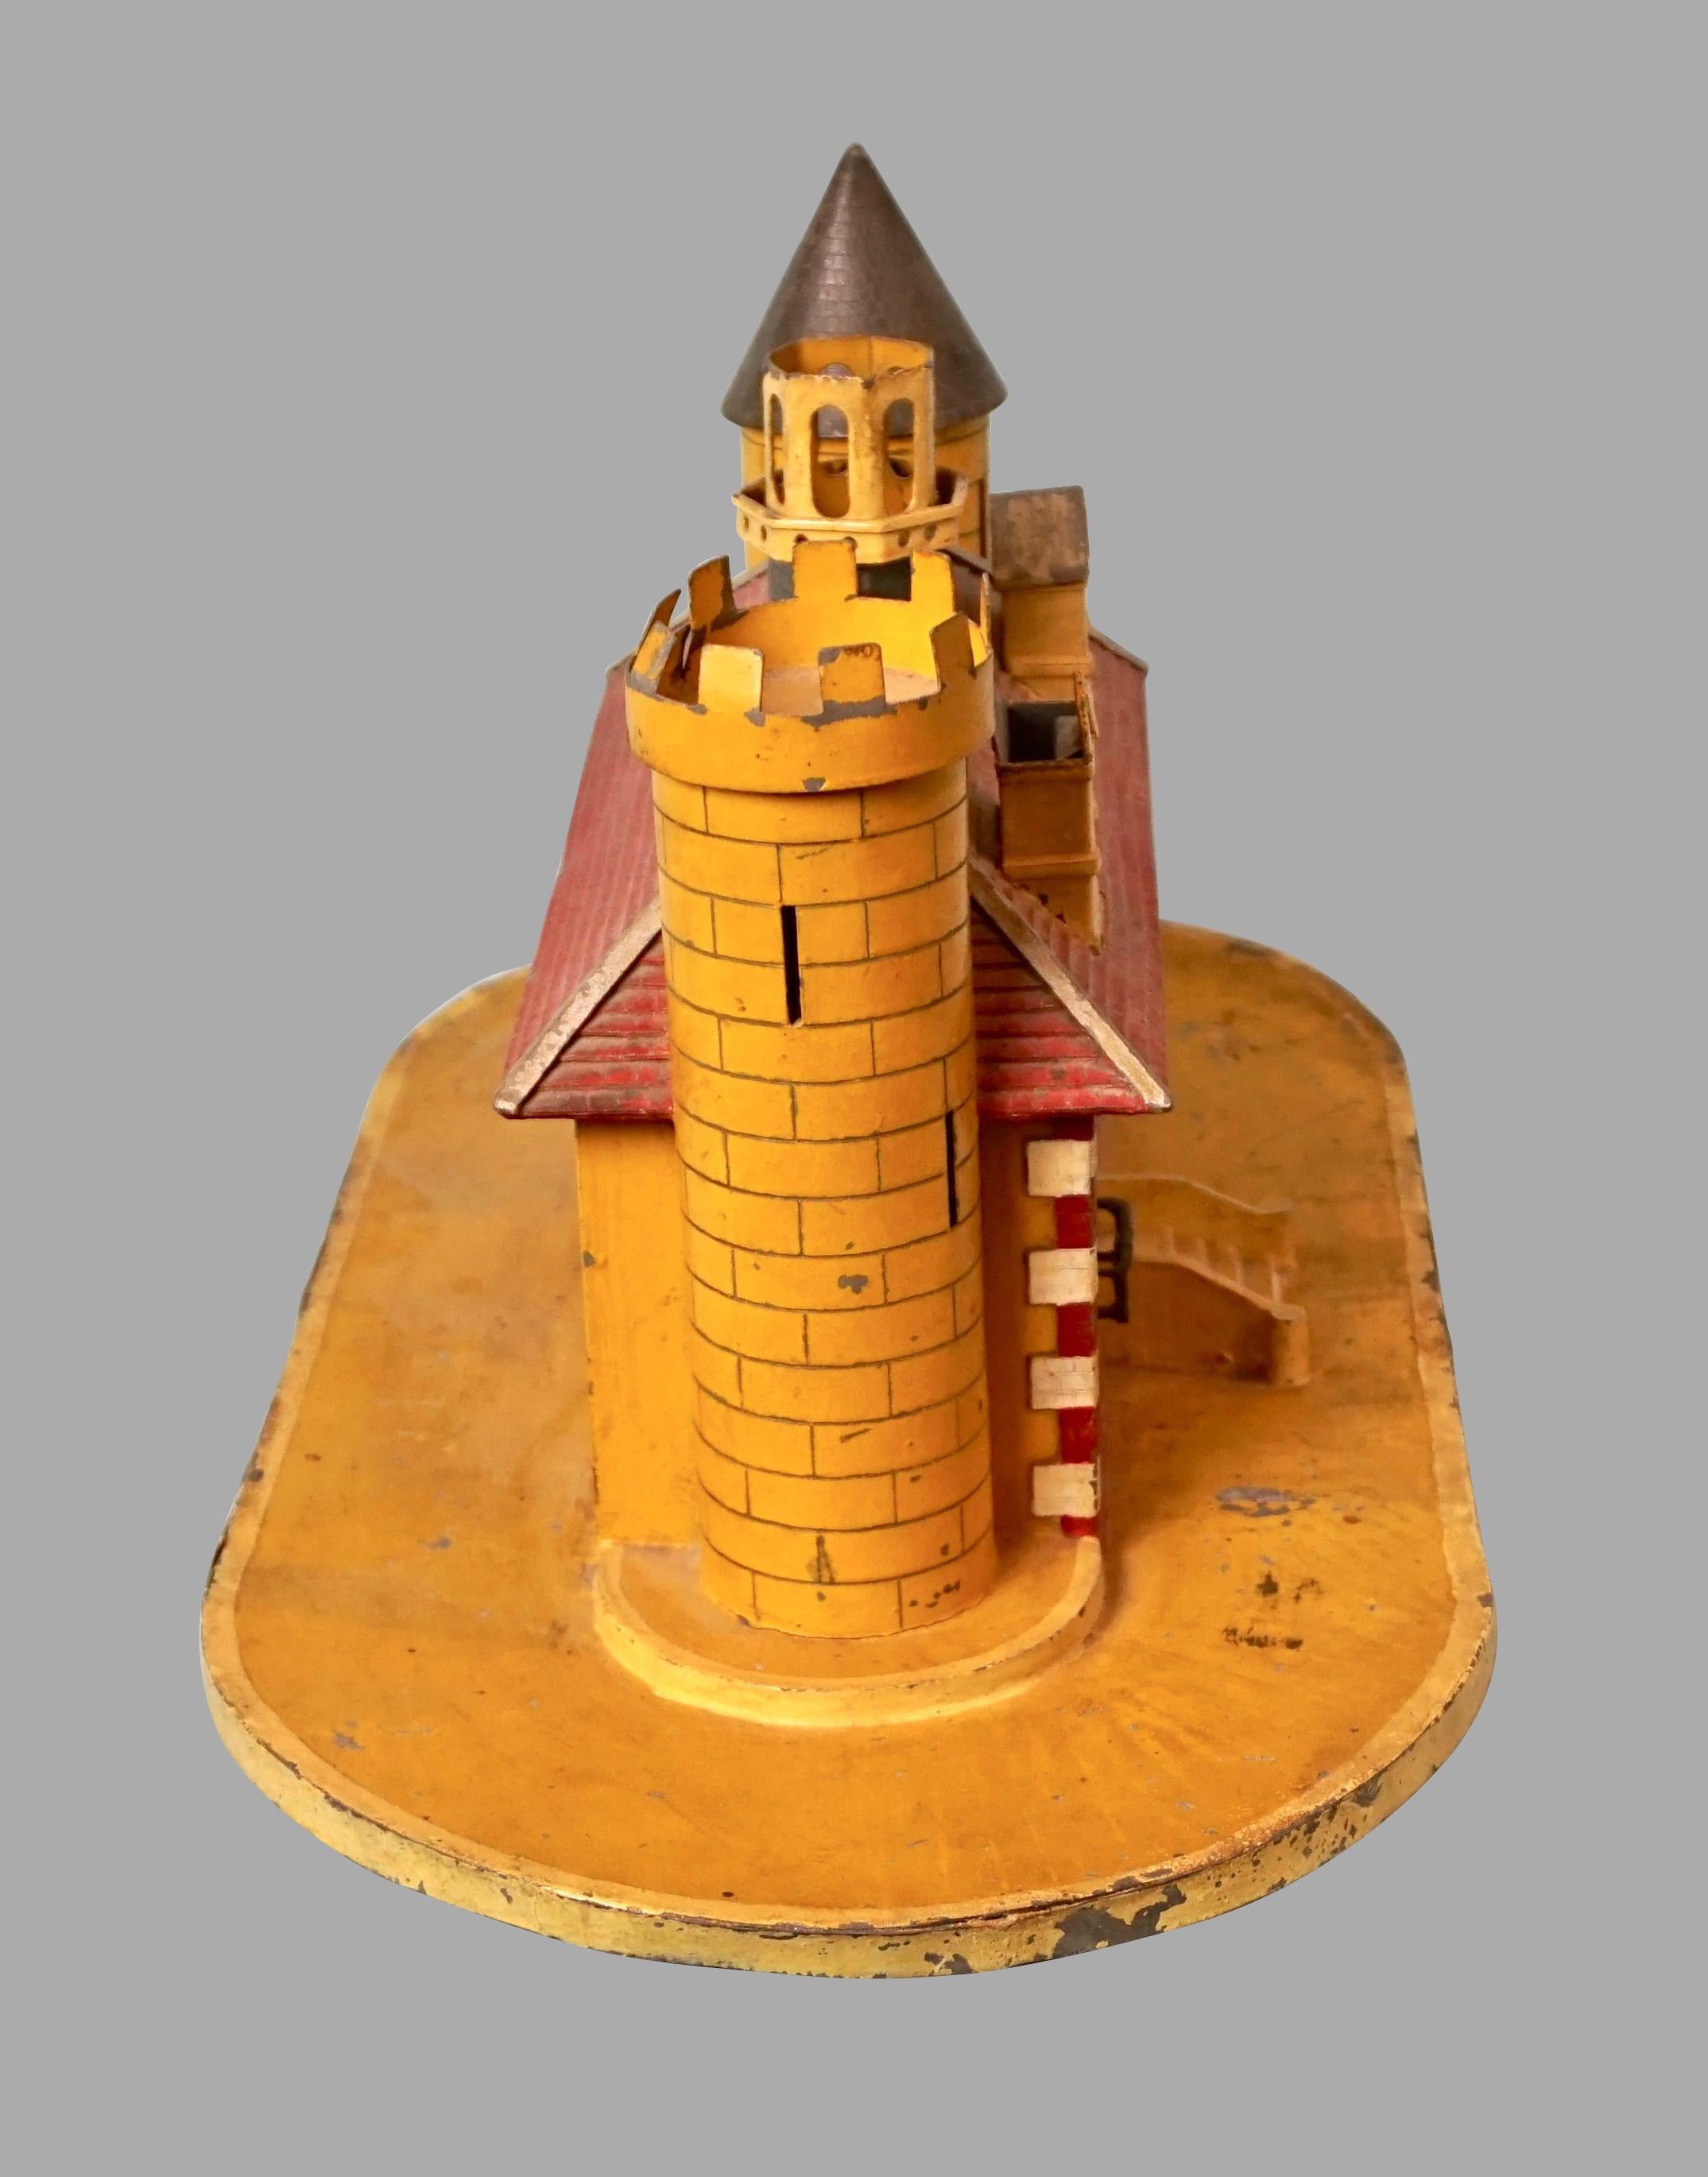 A charming English Victorian painted tin bank in the form of a castle, the turreted building painted in an array of bright colors with a peaked roof. Coins are retrievable from a slot in the bottom. Circa 1900.